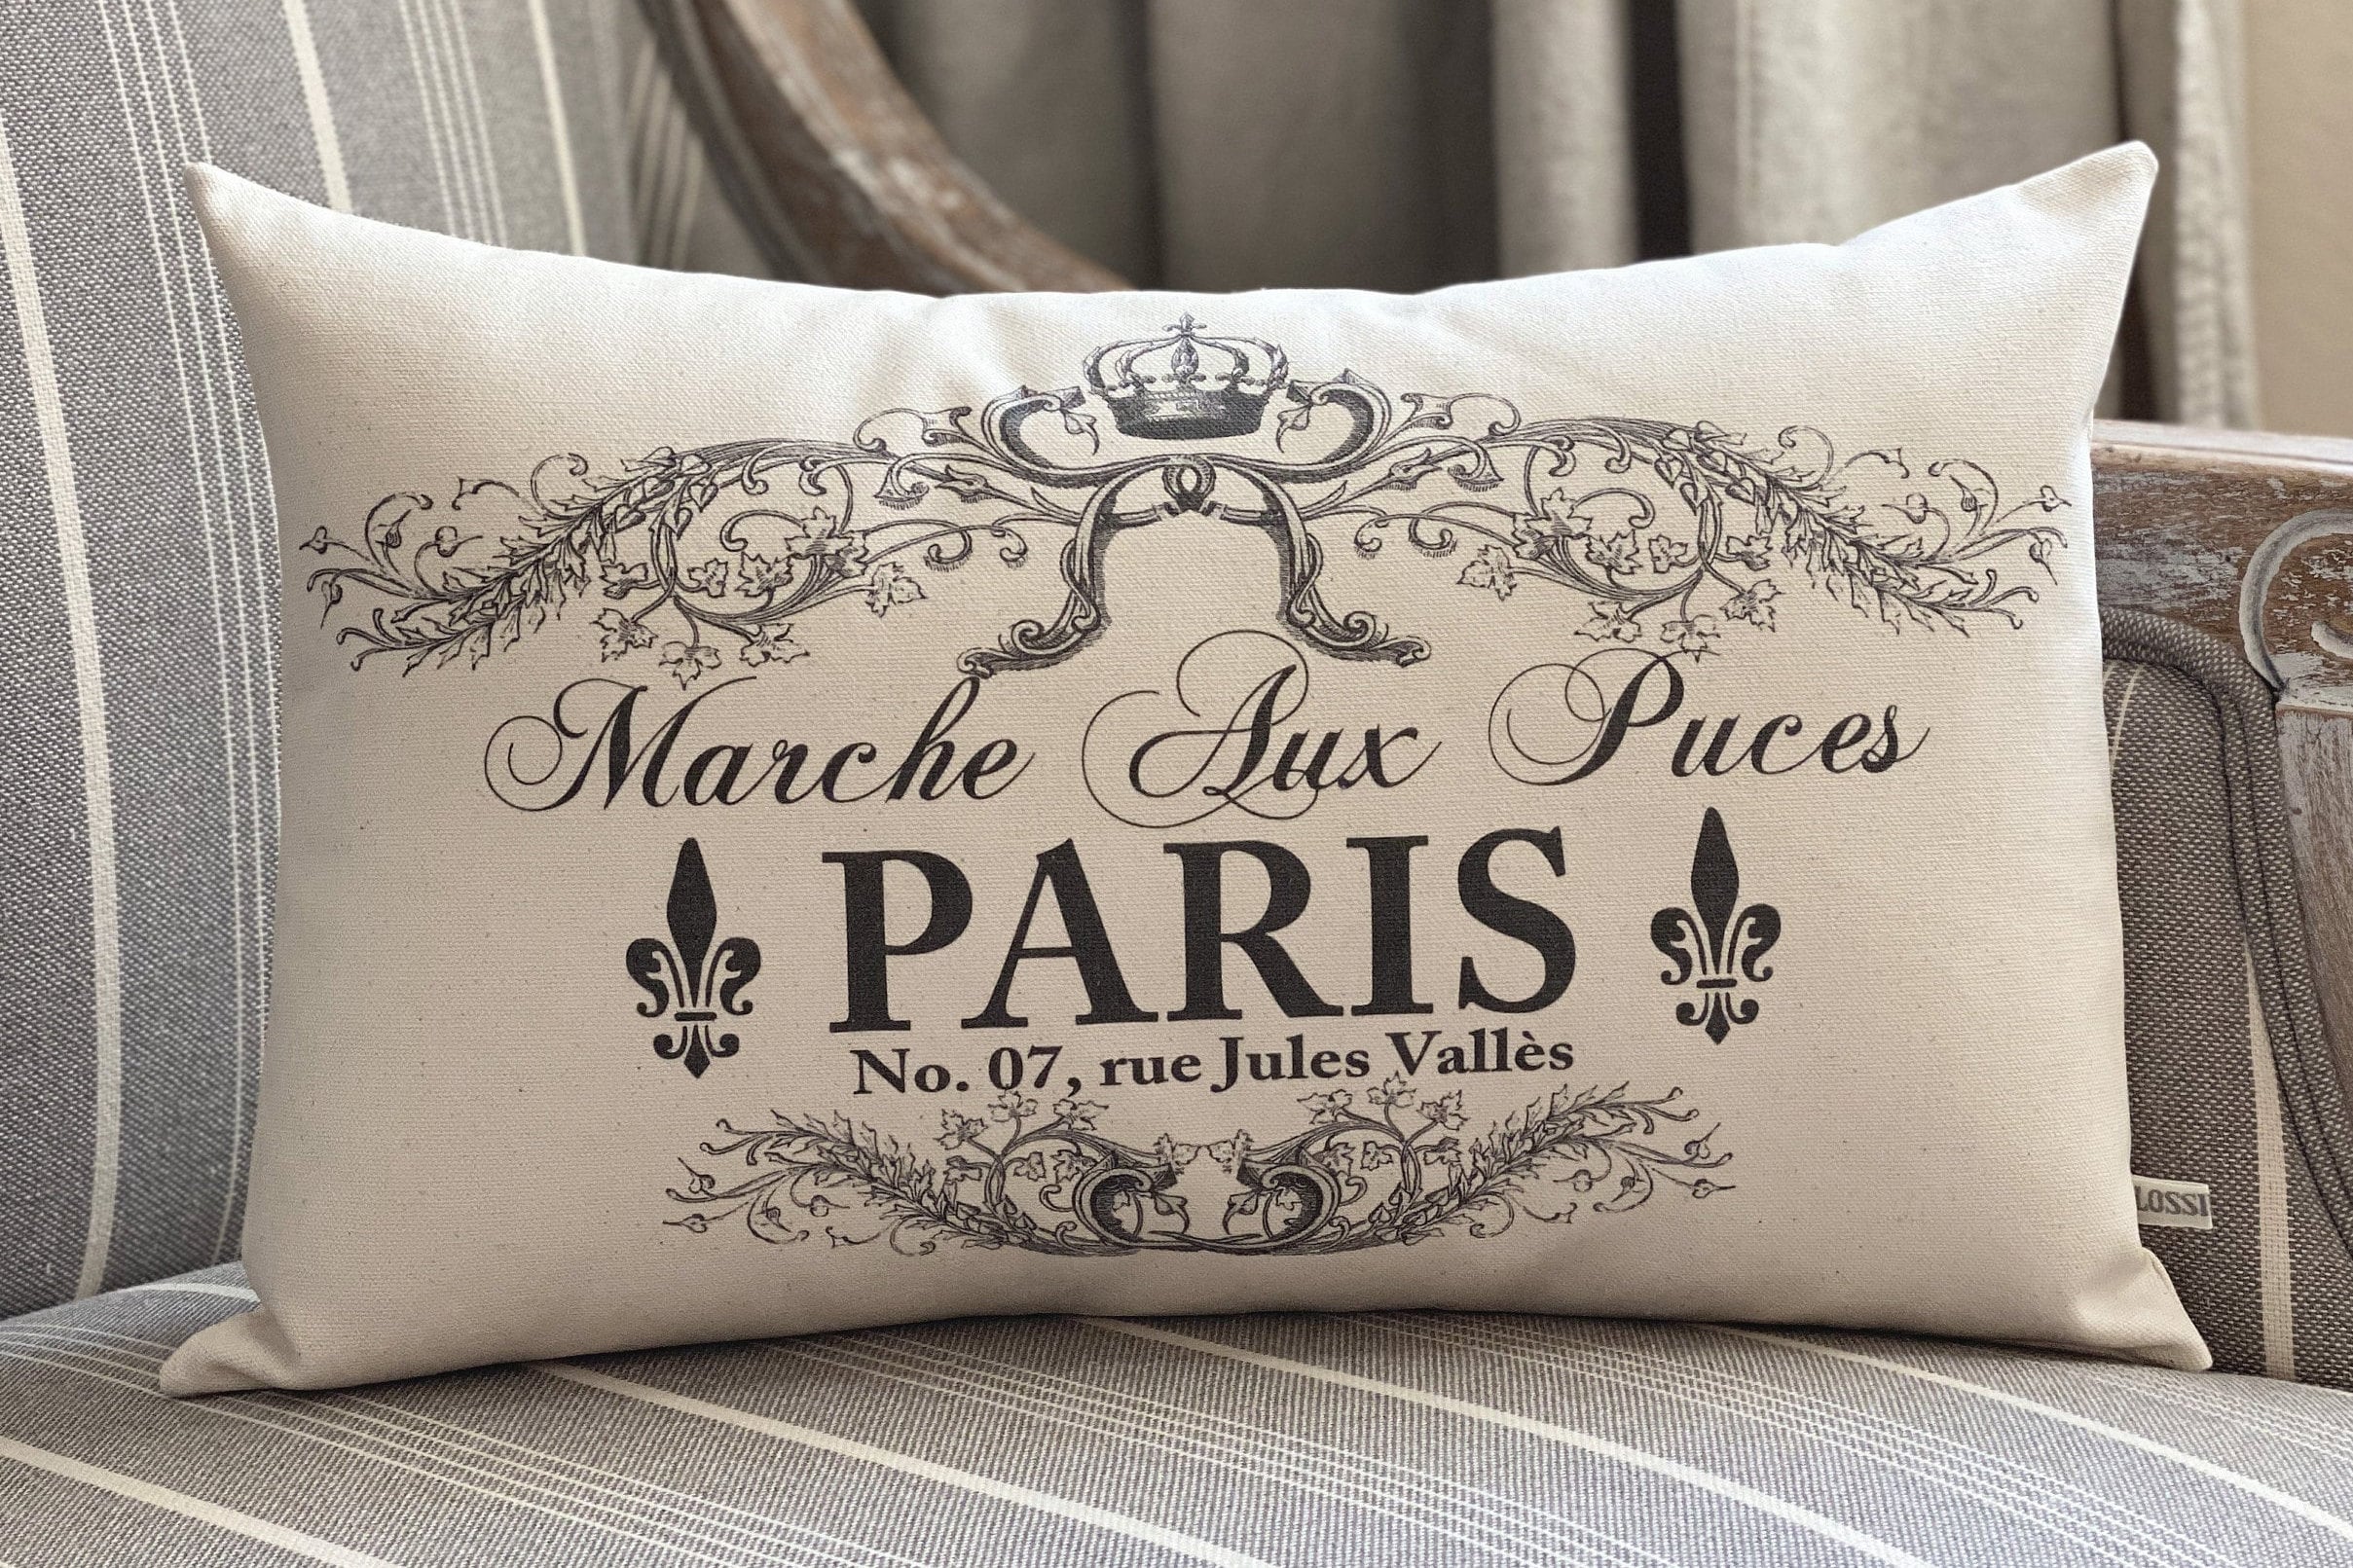 How to Make Your Pillows & Cushions Look Their Very Best! - Paris